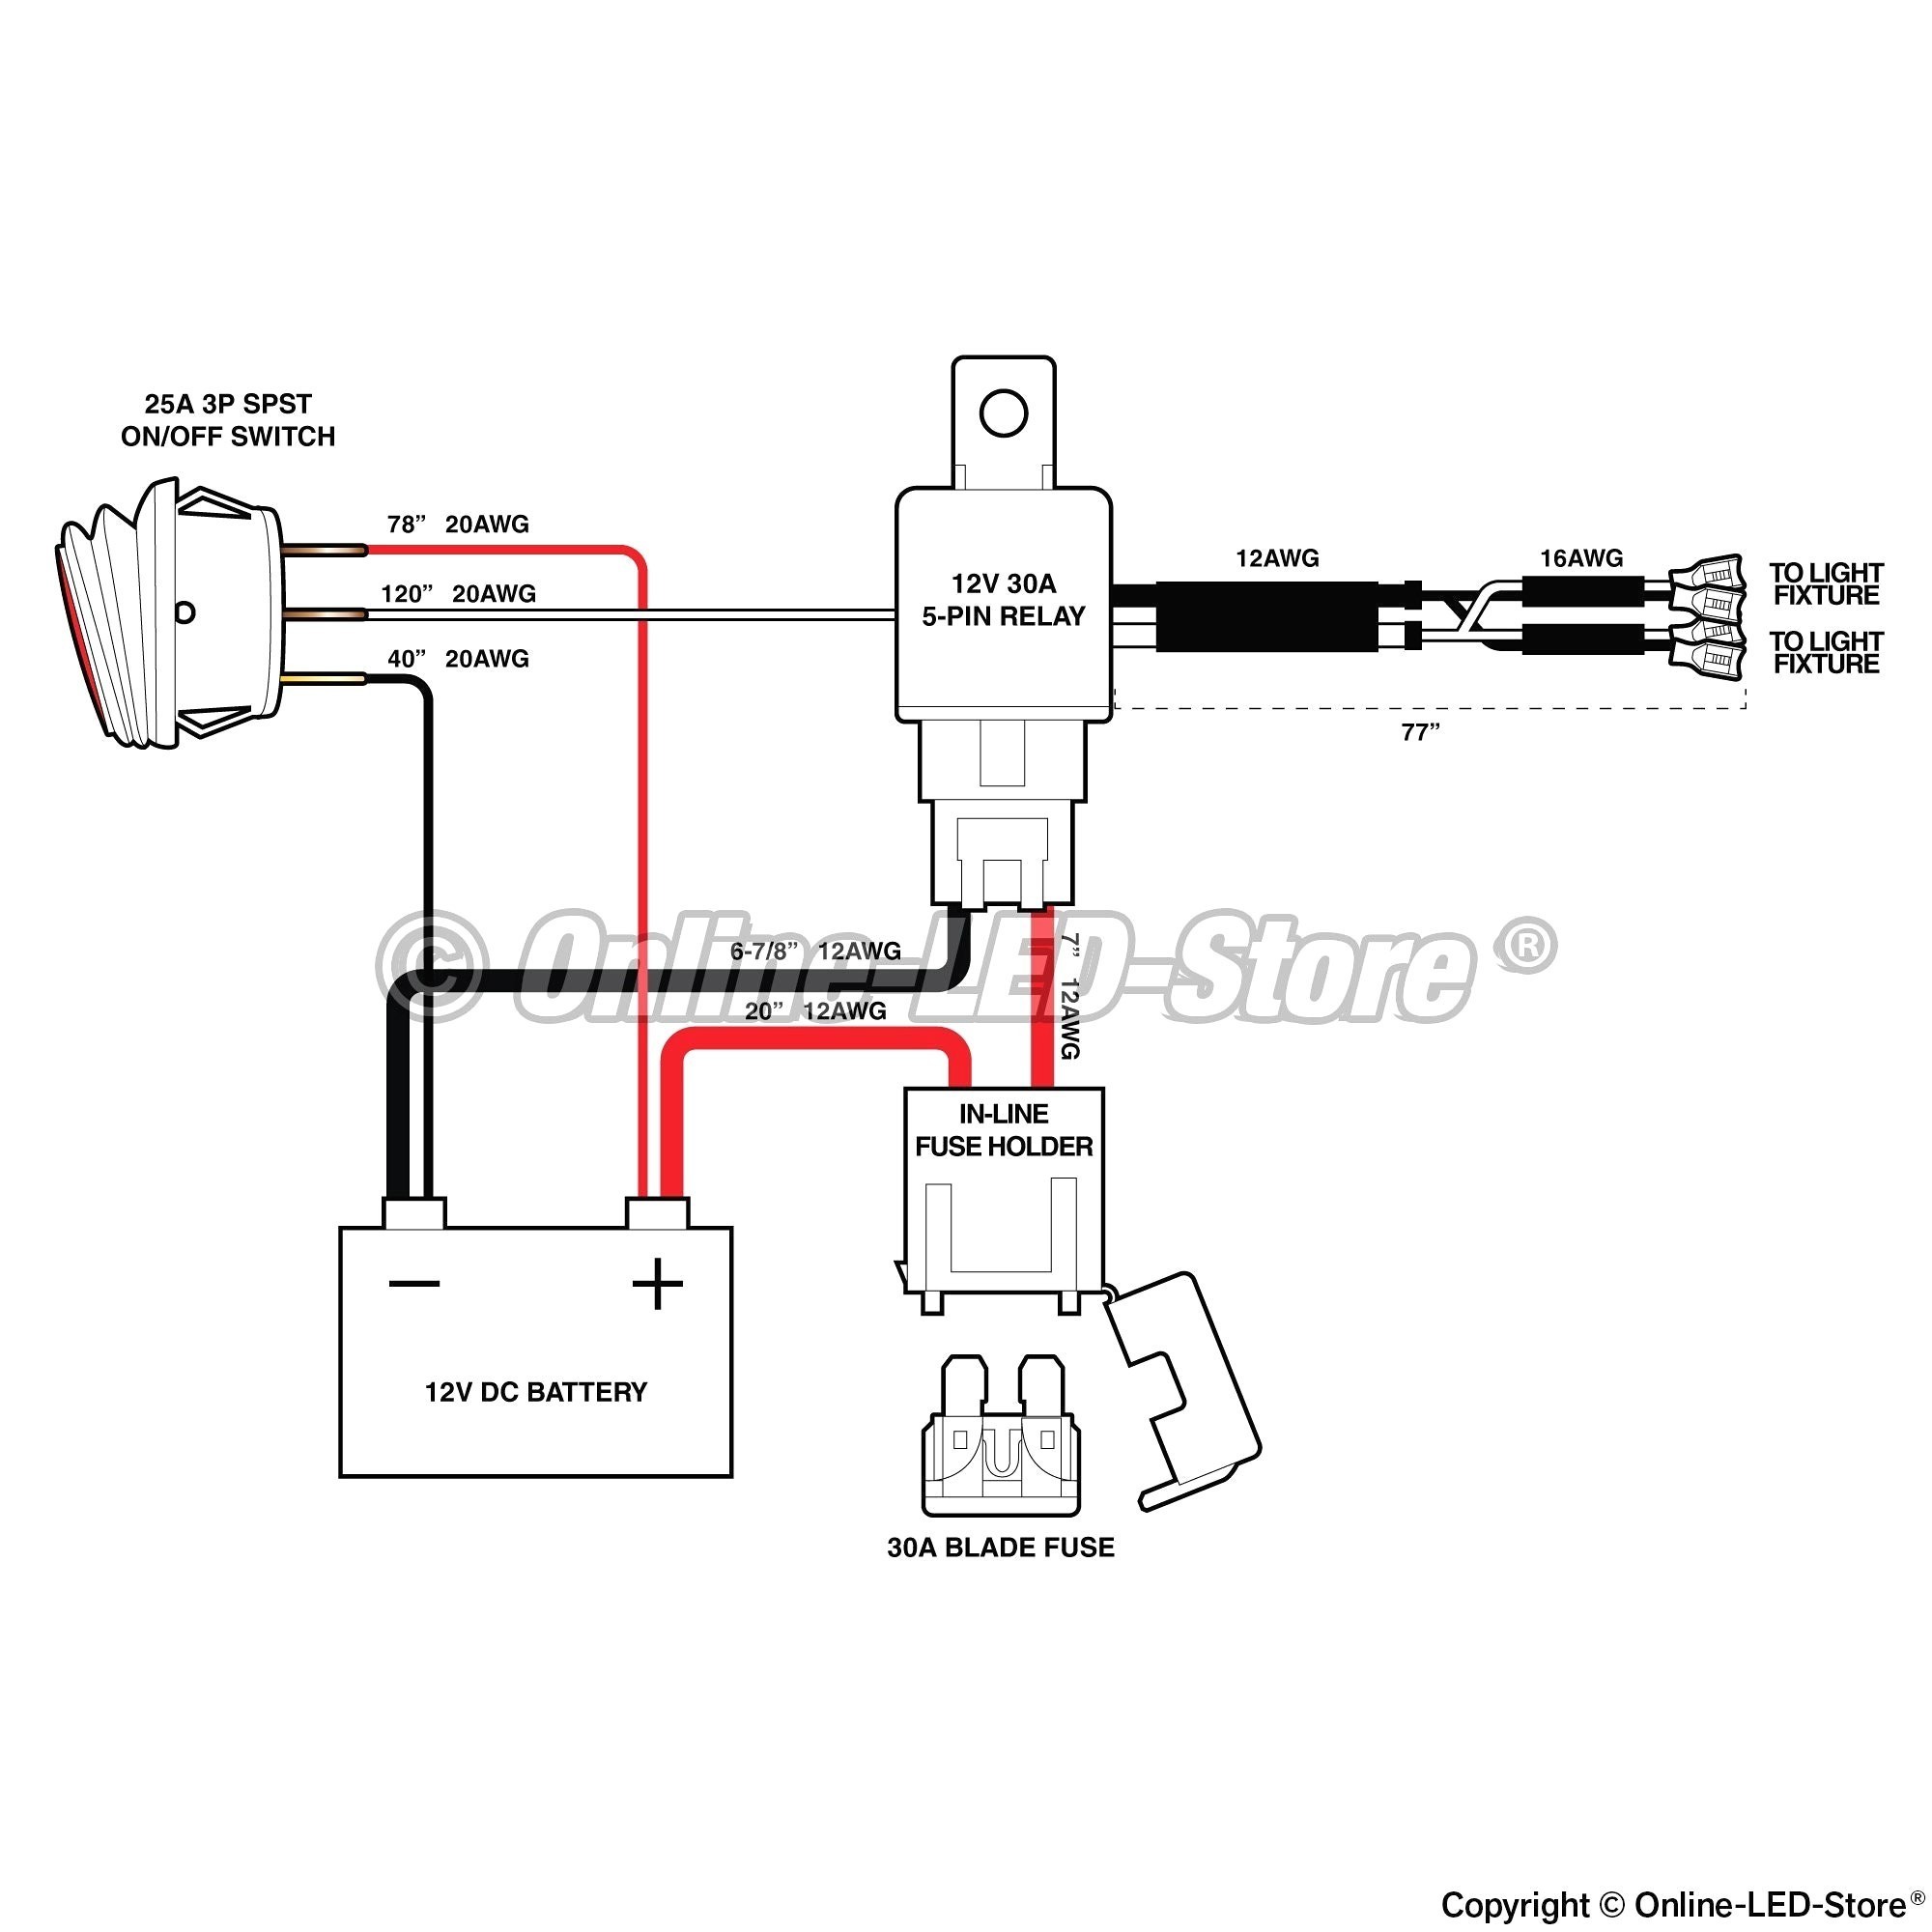 Wiring Diagram For A Led Light Bar Wiring Diagrams Konsult Light Bar Wiring Diagram Agt